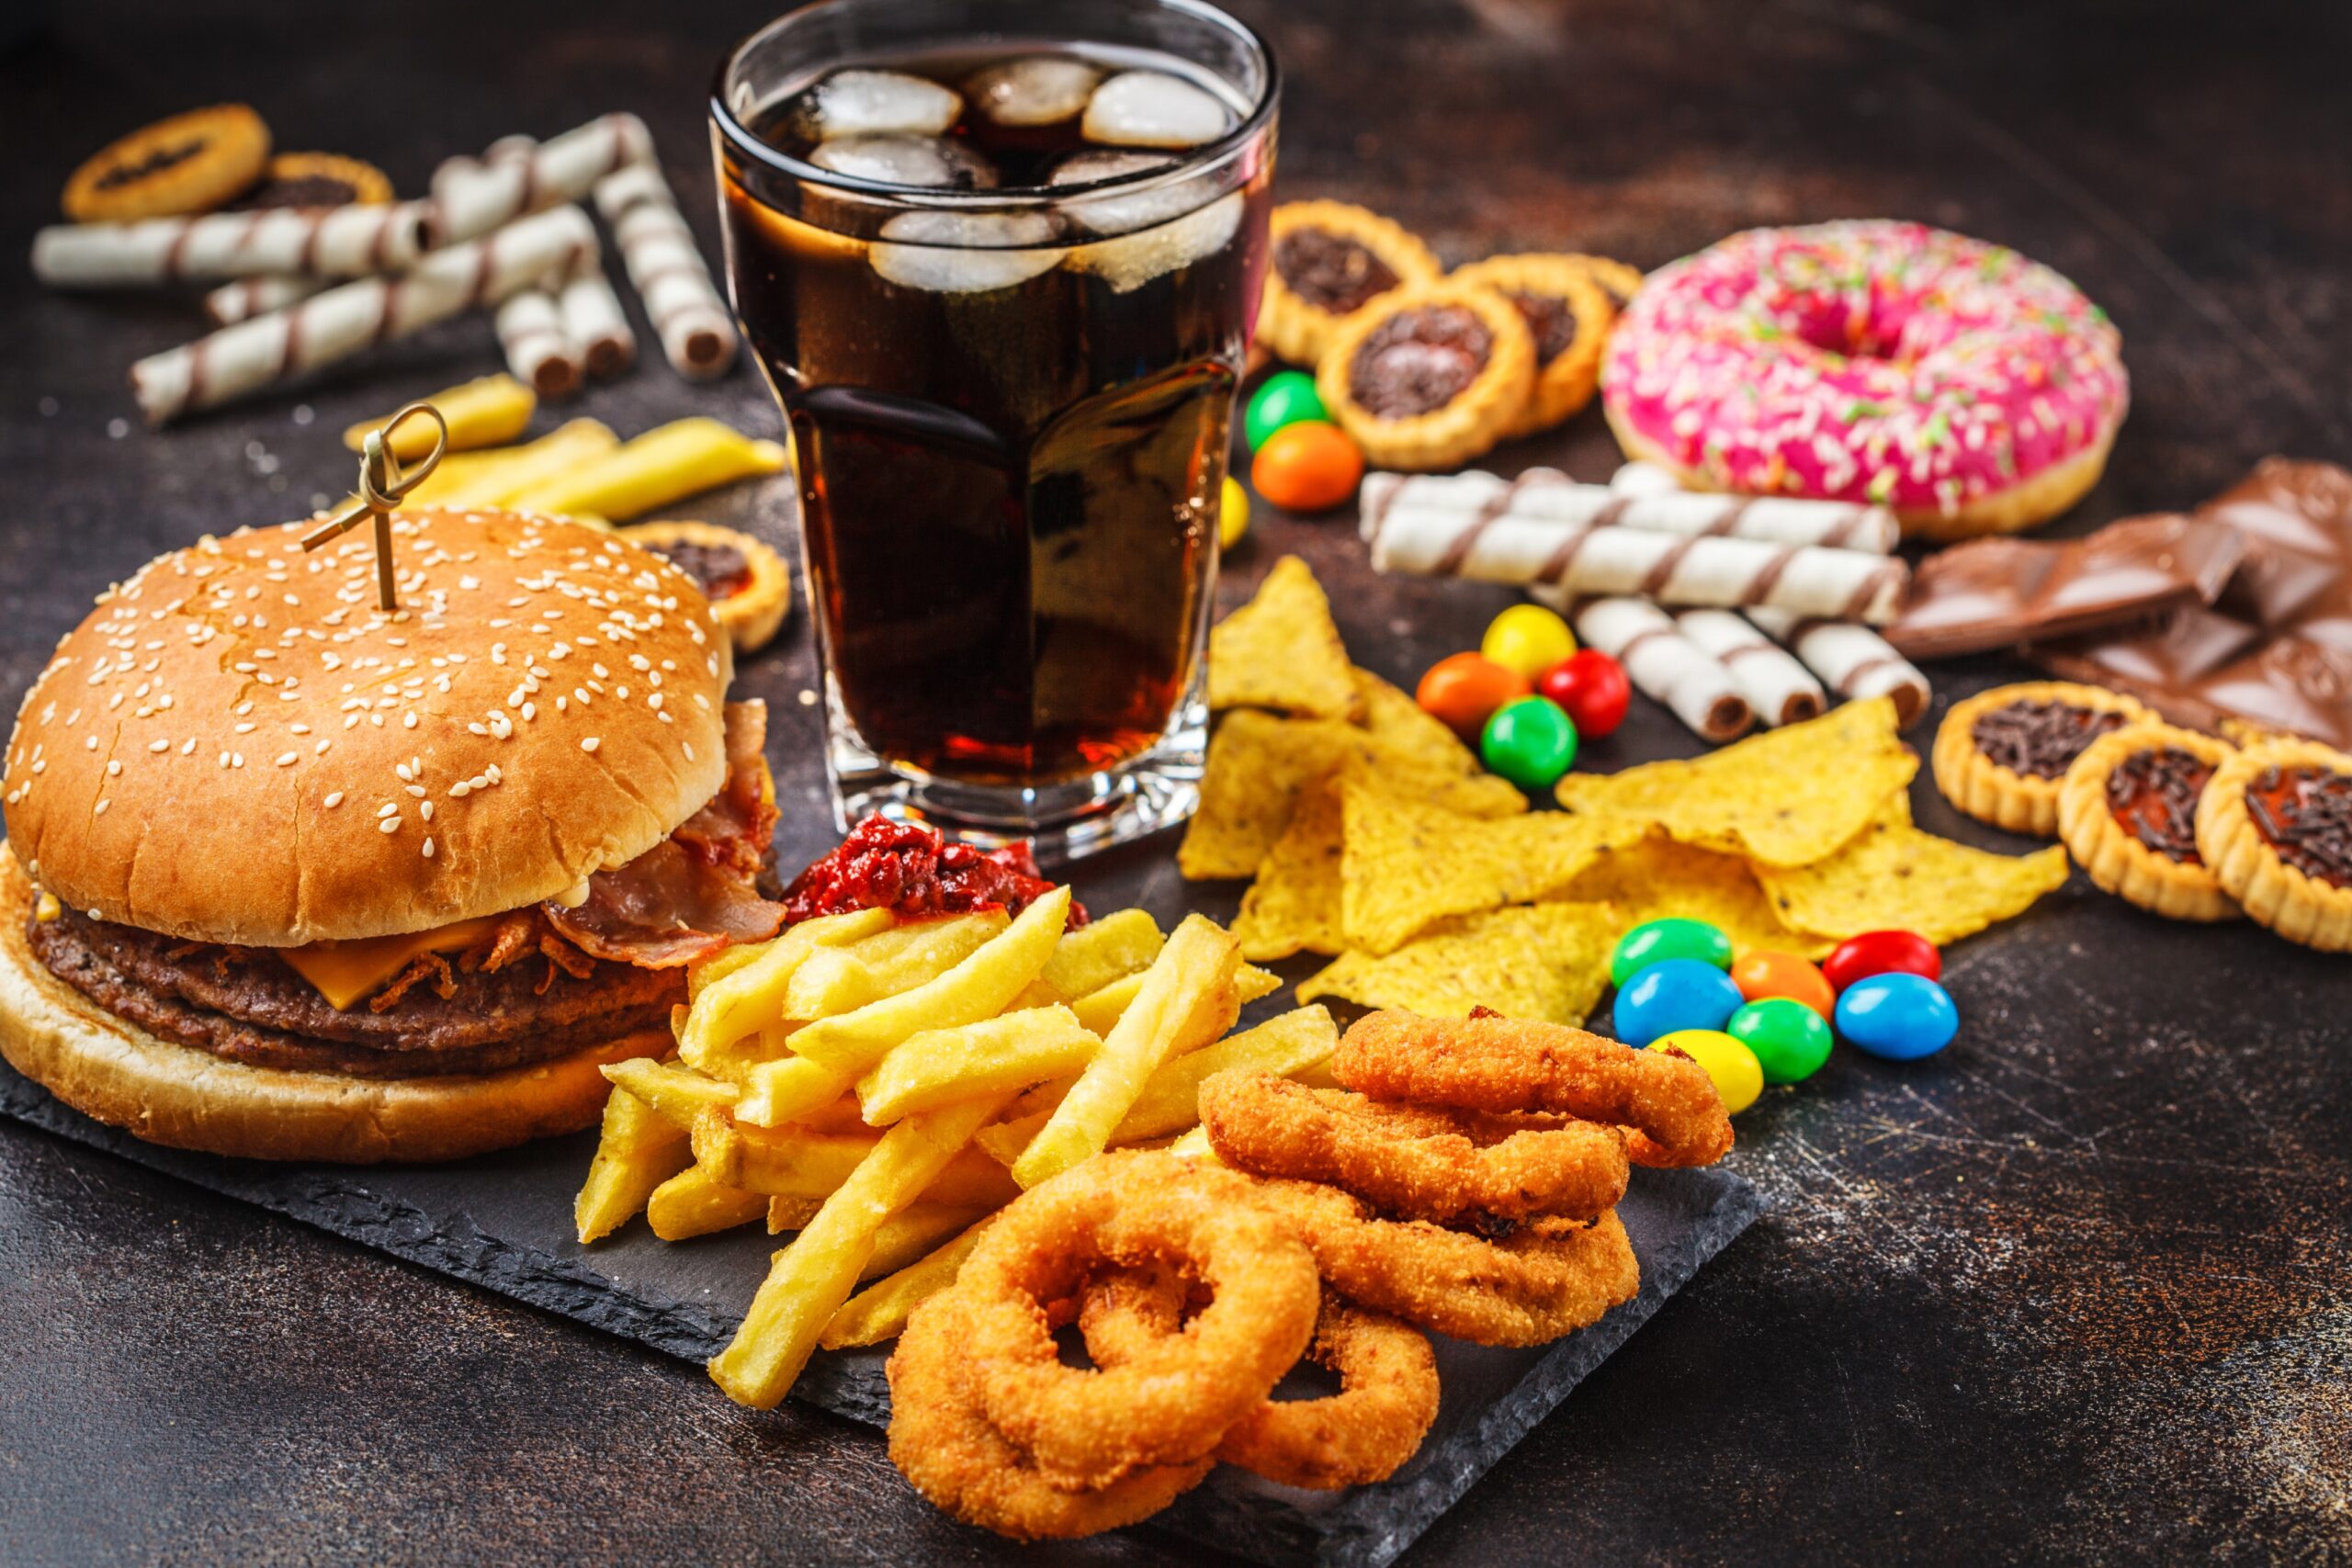 Consumption of ultra-processed food may increase the risk of depression